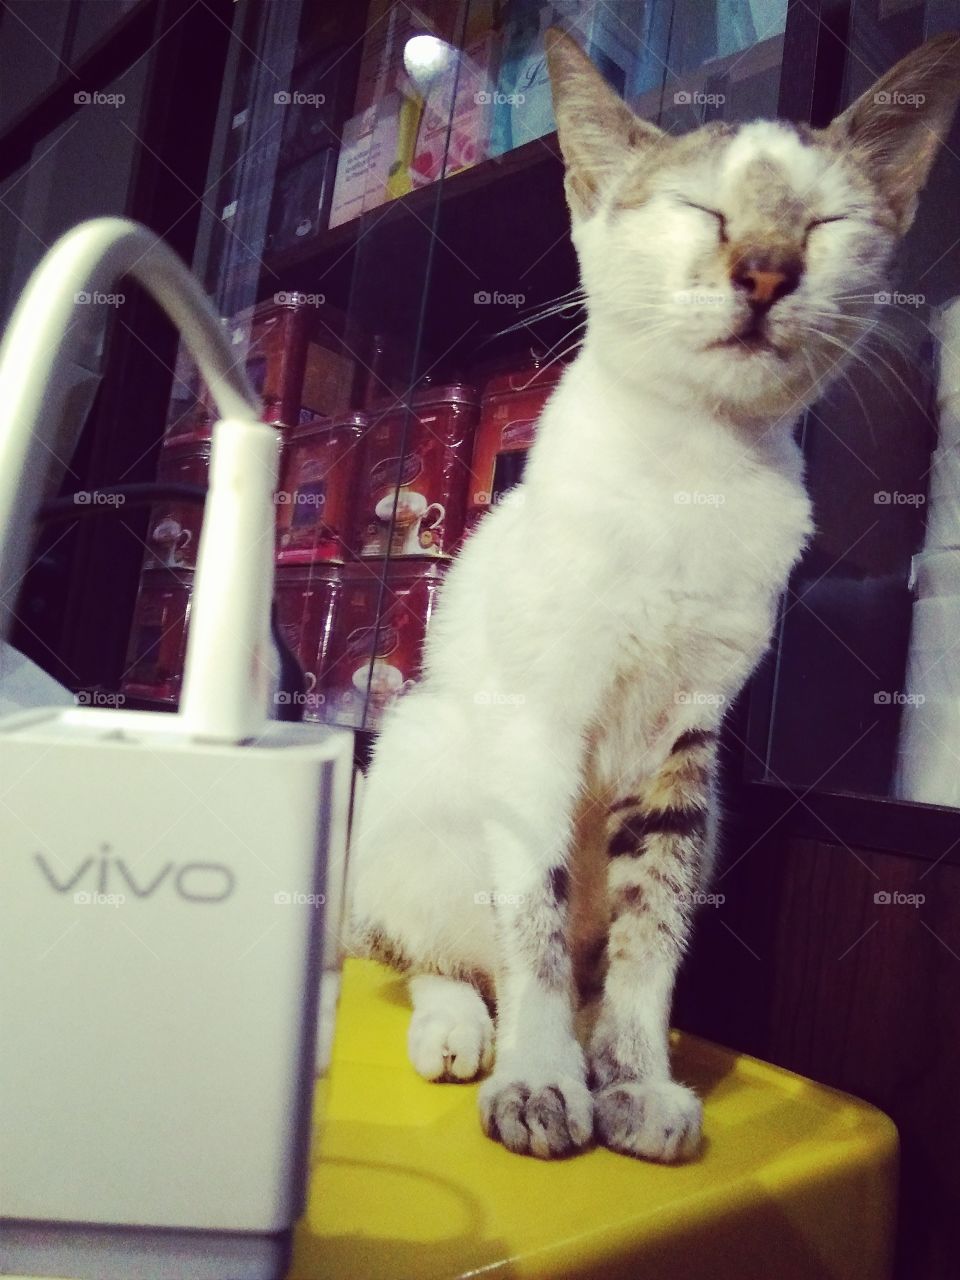 precious moment between Vivo charger and cat .